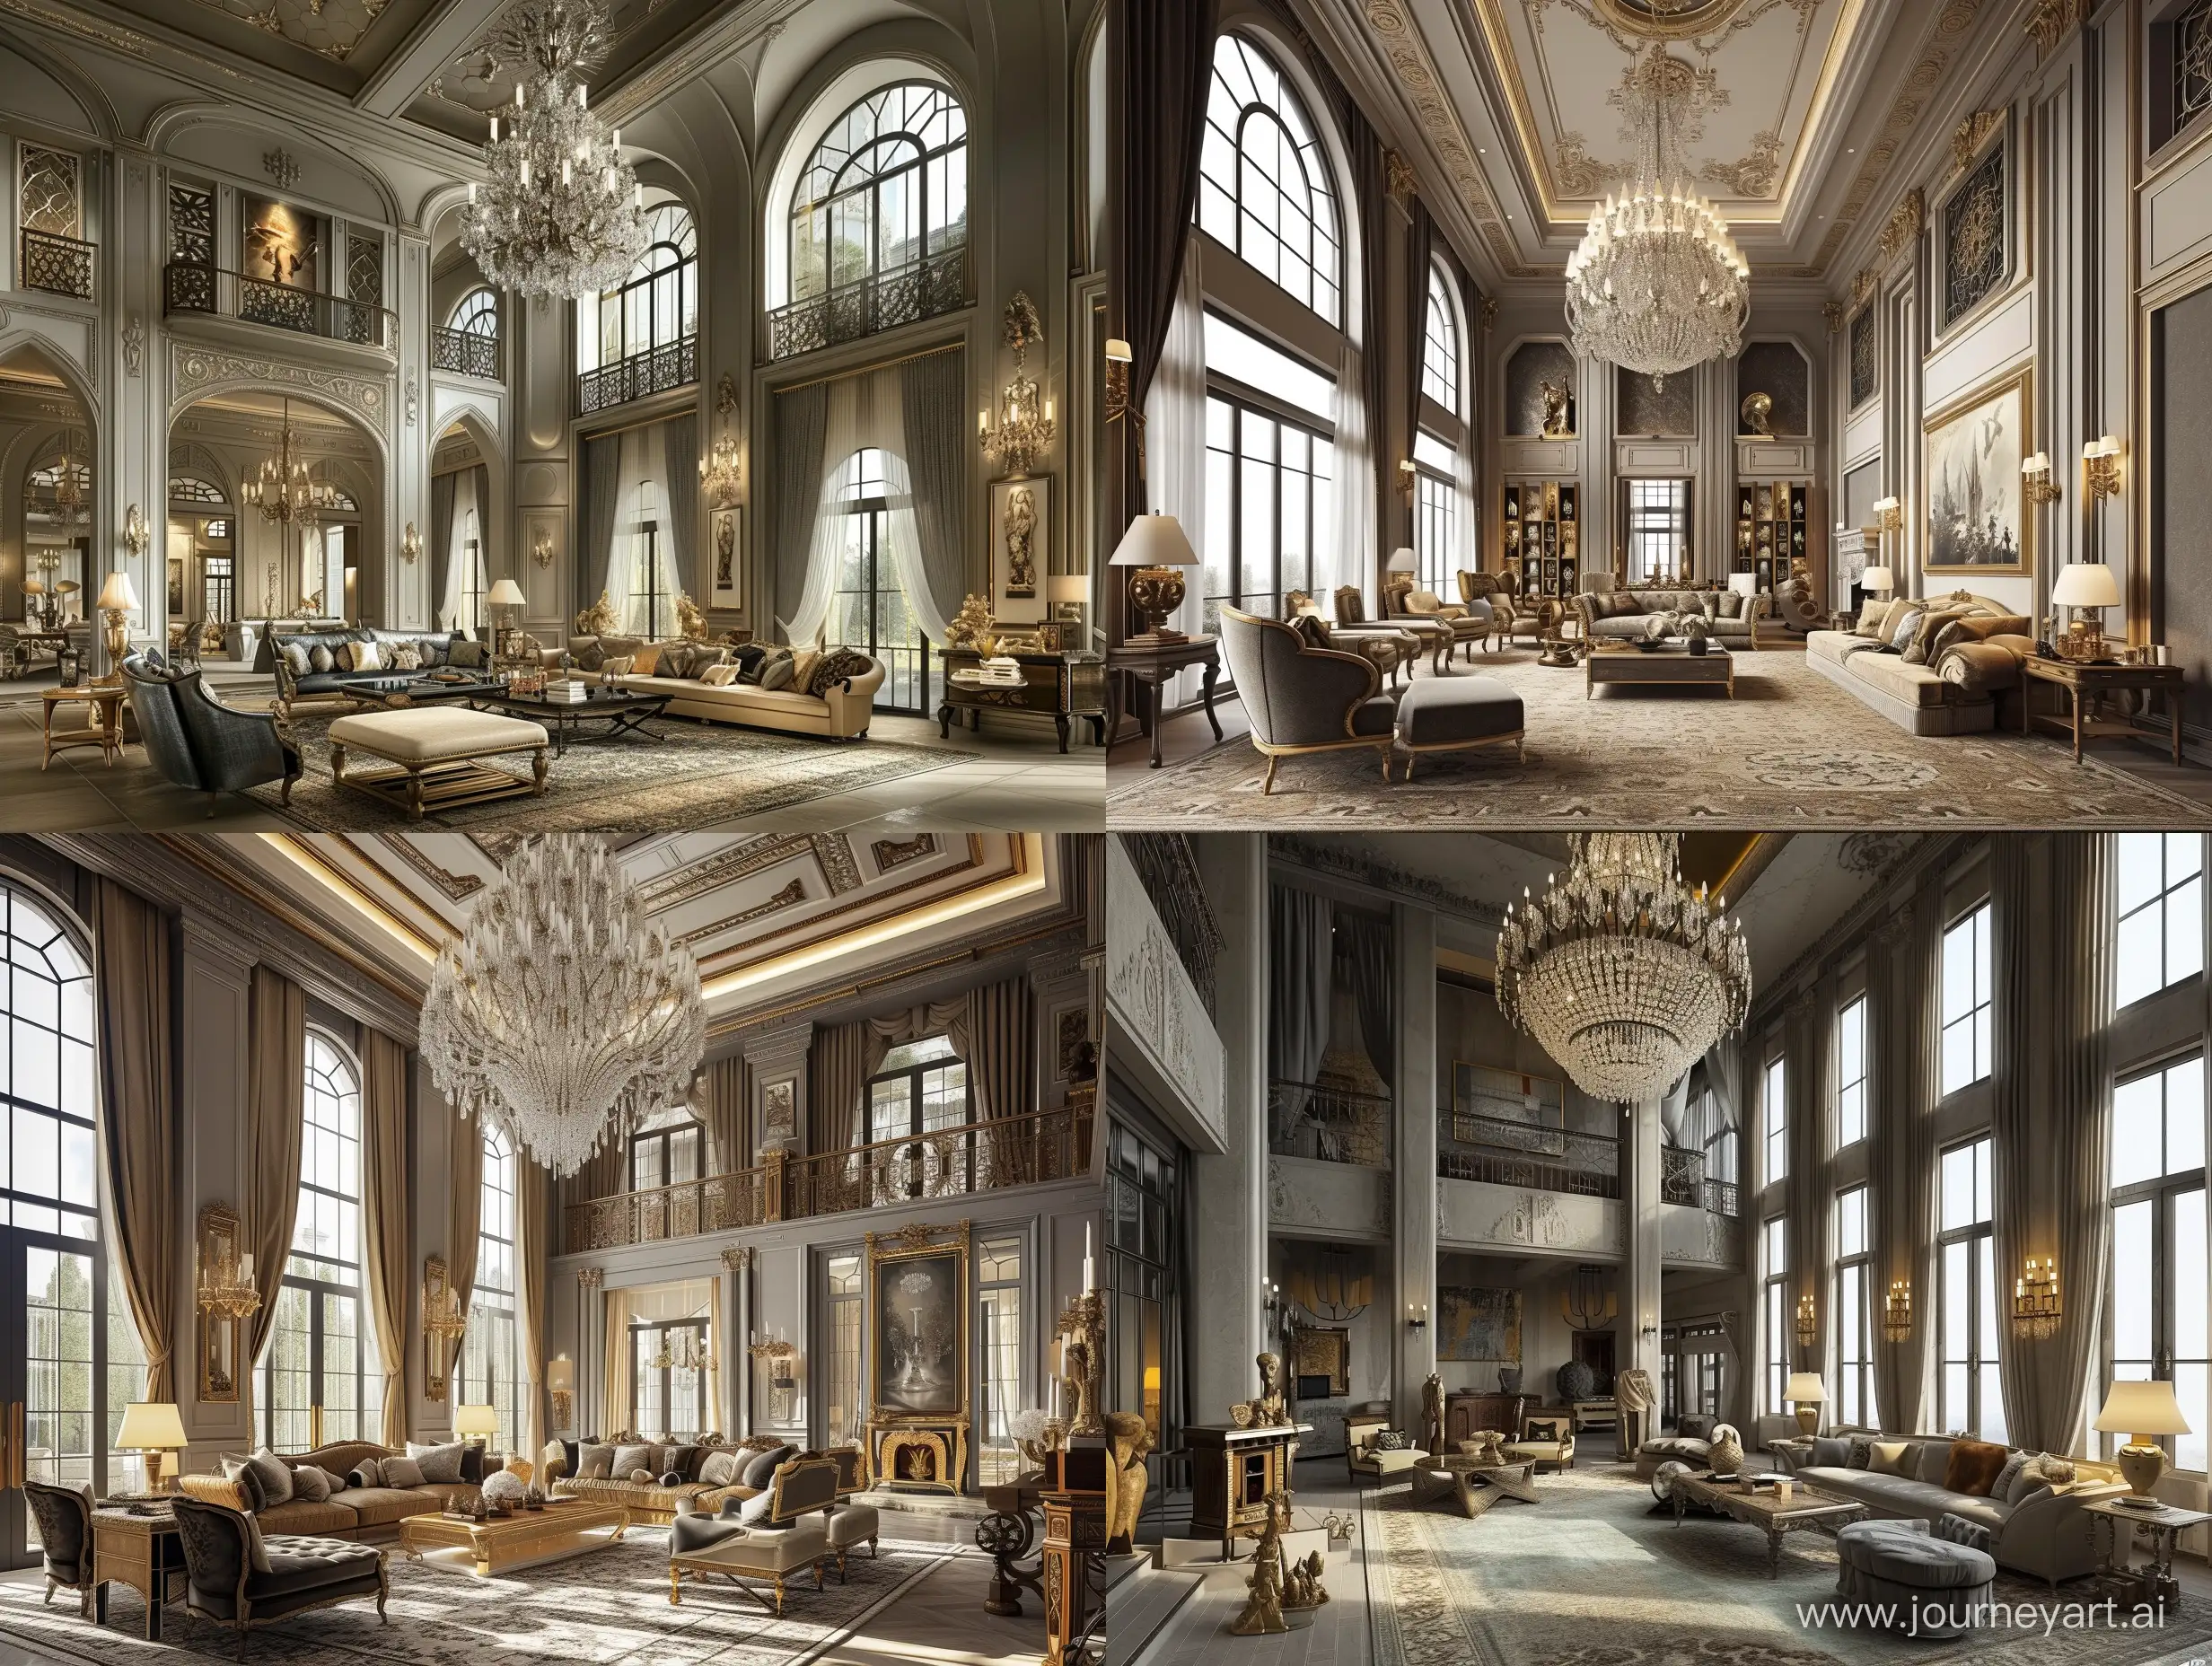 This room looks very luxurious with high ceilings, large chandeliers, and comfortable furniture.
A large chandelier hangs from the ceiling as the main source of lighting in the room.
Some luxurious furniture is placed in the room, including sofas, armchairs, and coffee tables.
The high ceiling adds a sense of space and luxury to the room.
There are many windows around the room, allowing natural light to come in.
A large carpet covers the floor, adding comfort and luxury to the room.
The walls have some decorations, such as paintings and sculptures, which add an artistic touch to the room.
The home decor in the room is very delicate, including curtains, throw pillows, and decorative items.
The lighting effect in the room is excellent, creating a warm and luxurious atmosphere.
The color matching in the room is very harmonious, using beige and gray as the main colors, paired with gold and black decorations.